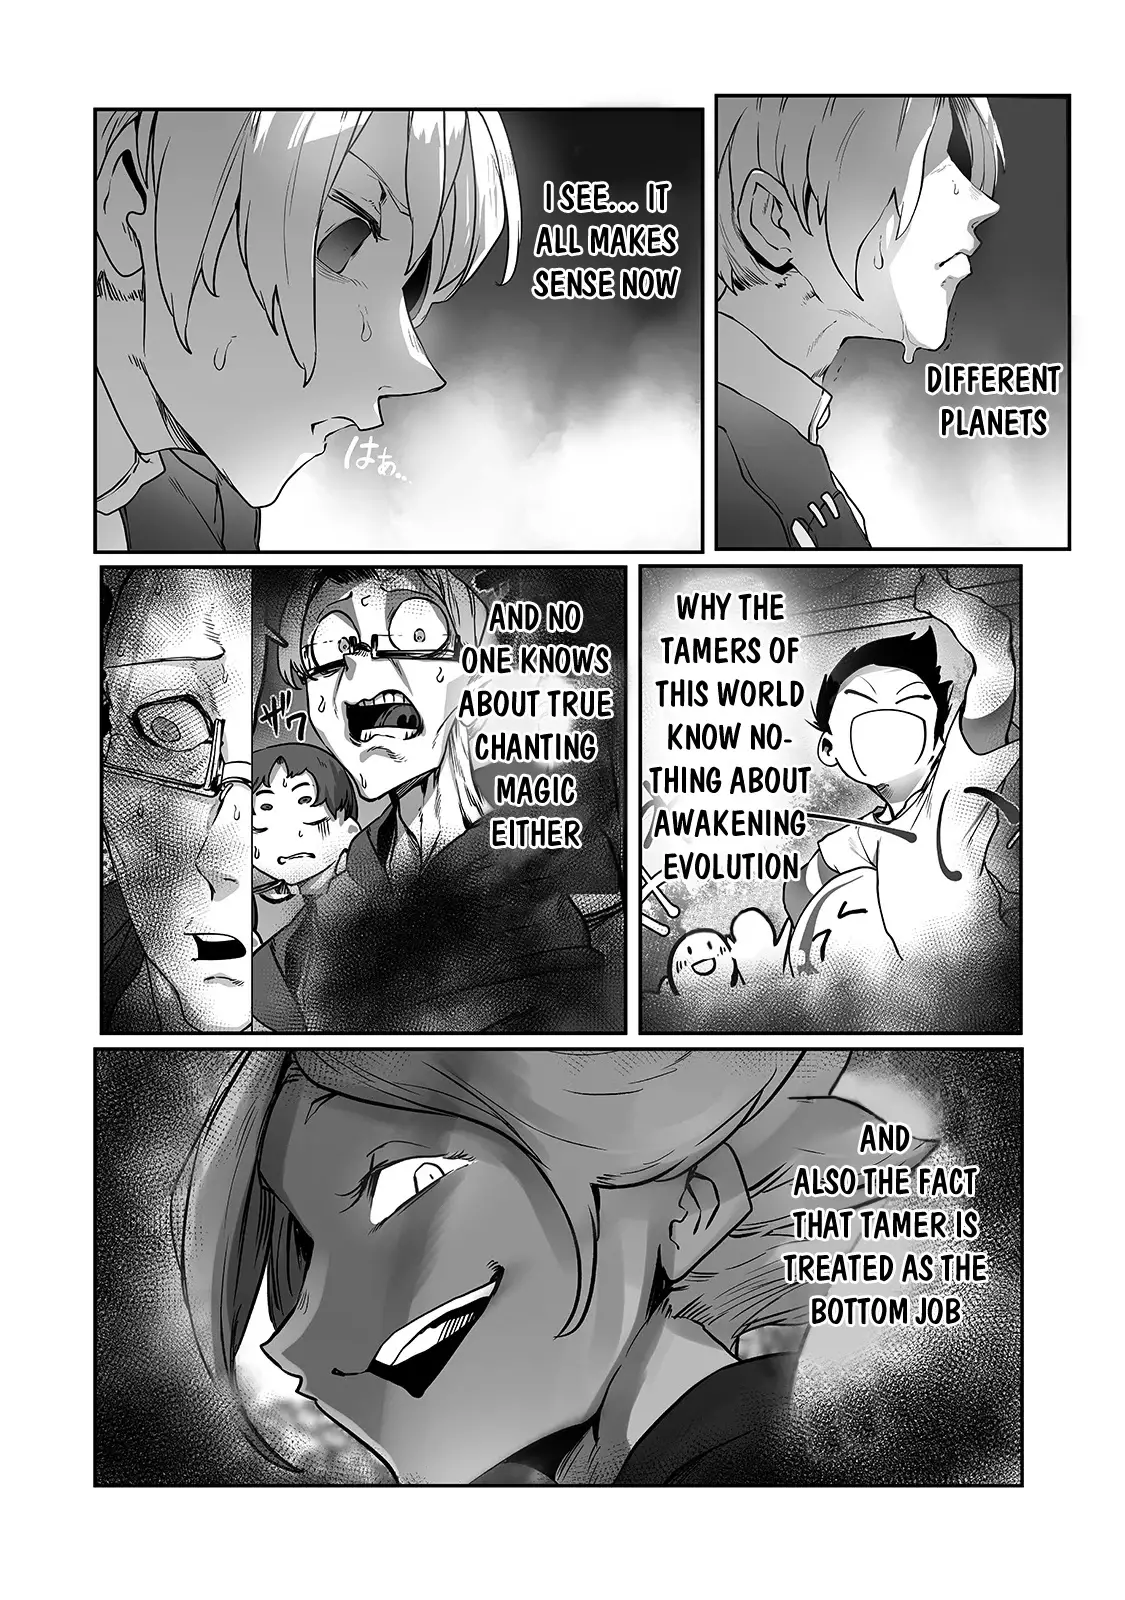 The Useless Tamer Will Turn Into The Top Unconsciously By My Previous Life Knowledge - 10 page 27